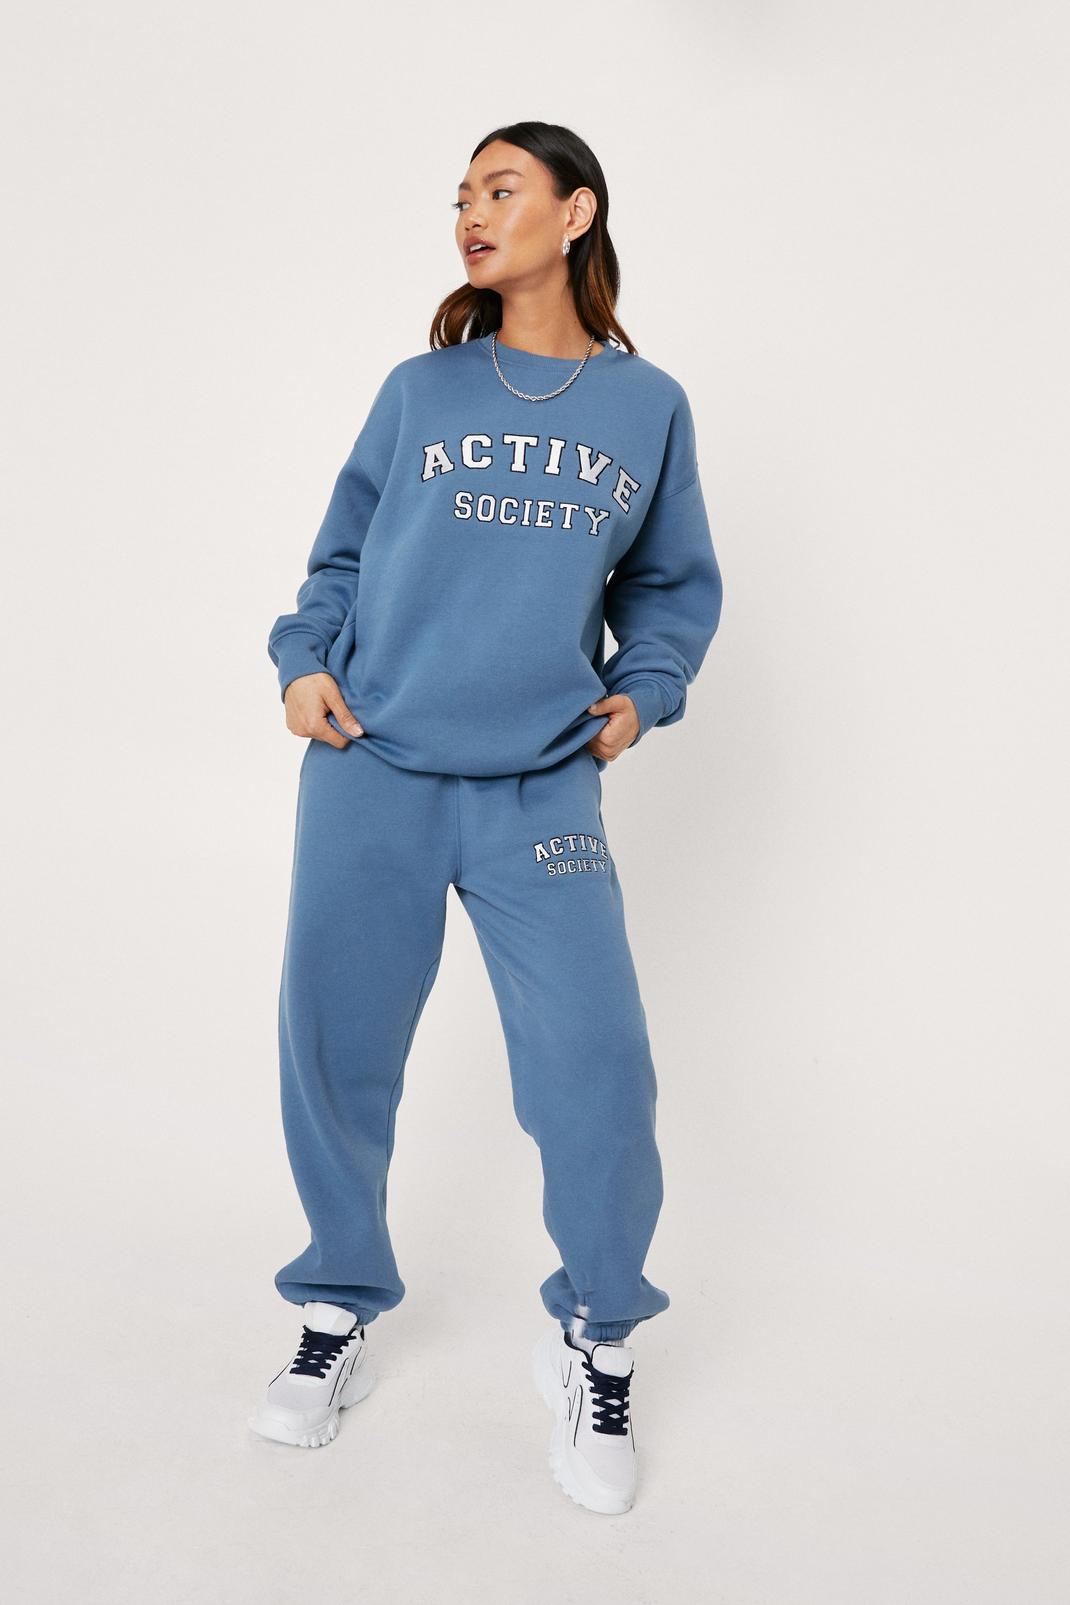 Blue Petite Active Society High Waisted Sweatpants image number 1